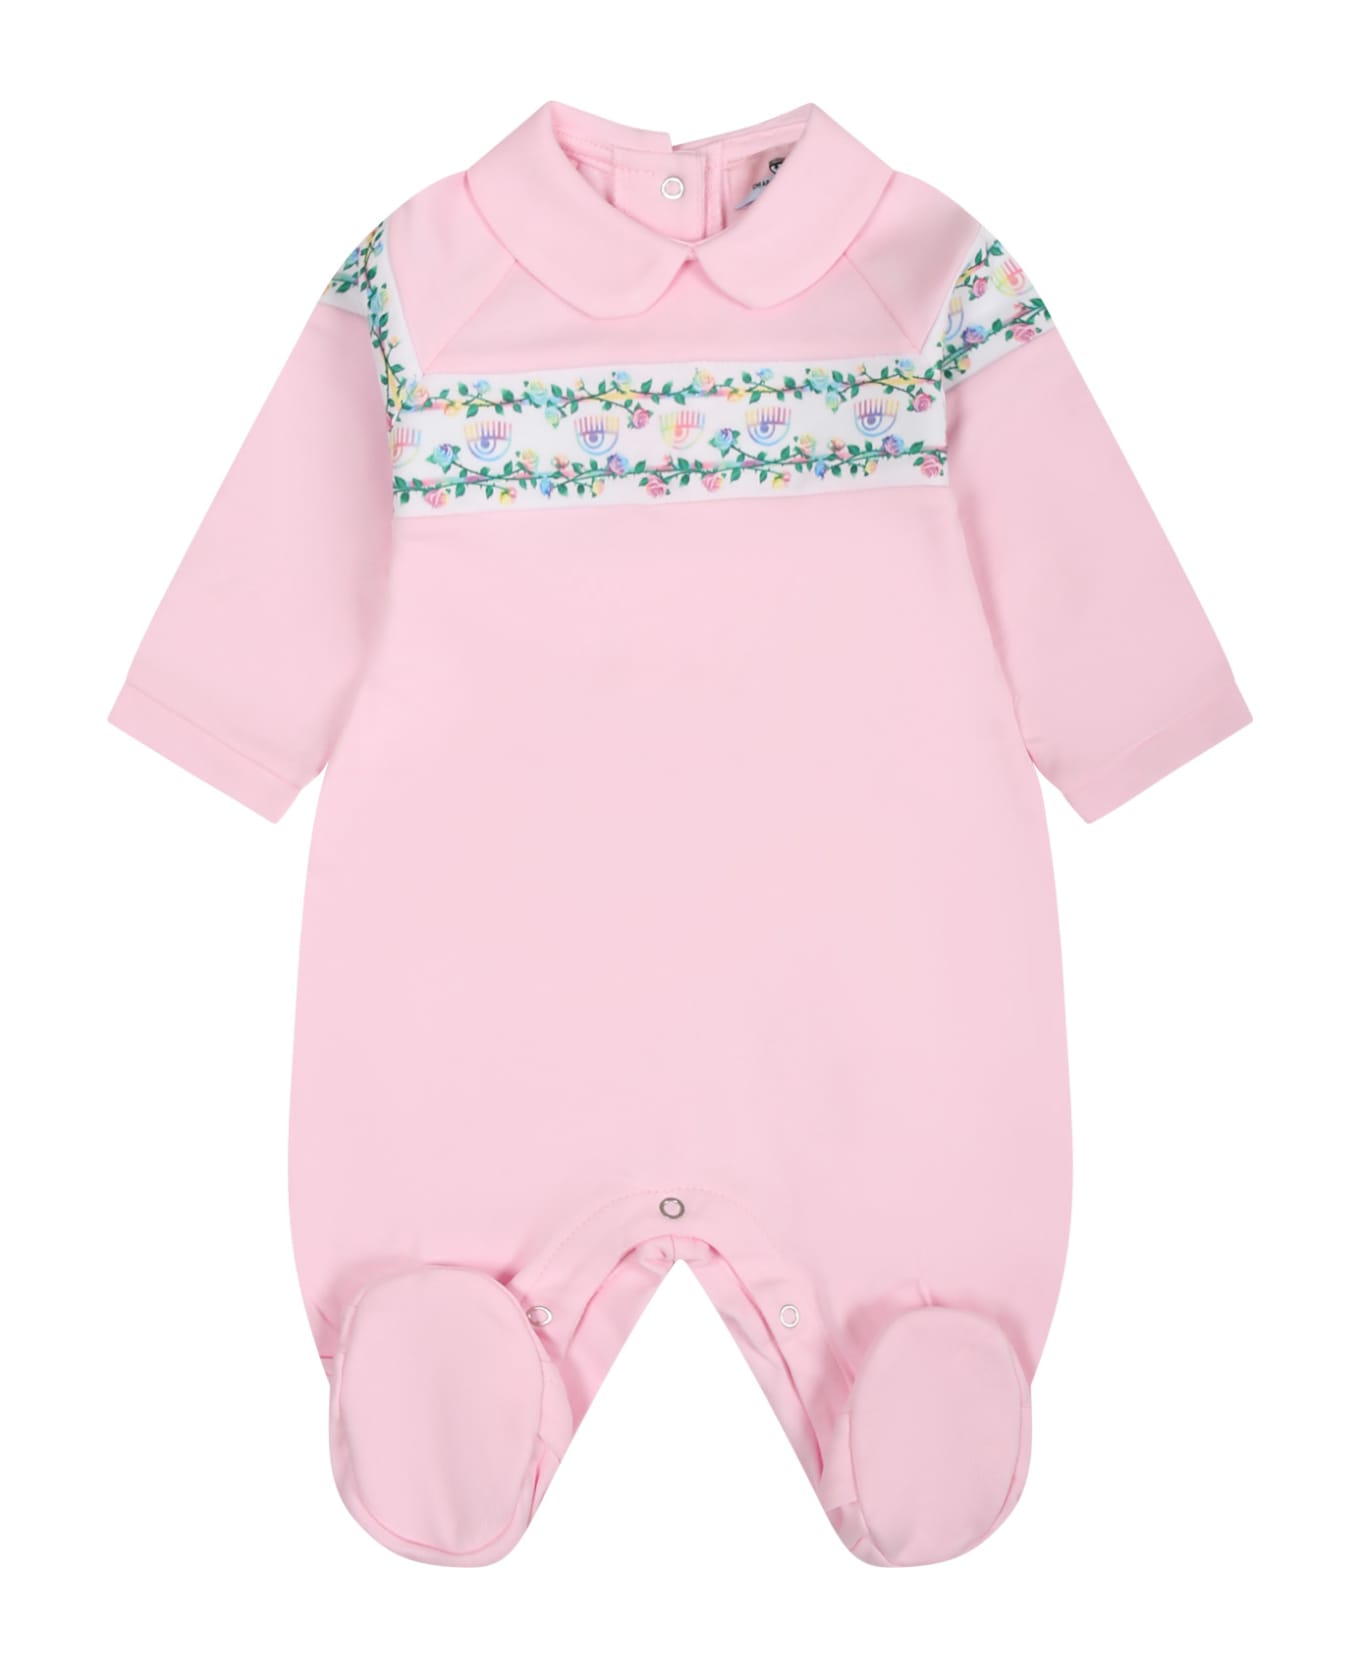 Chiara Ferragni Pink Playsuit For Baby Girl With Flirting Eyes And Multicolor Roses - Pink ボディスーツ＆セットアップ